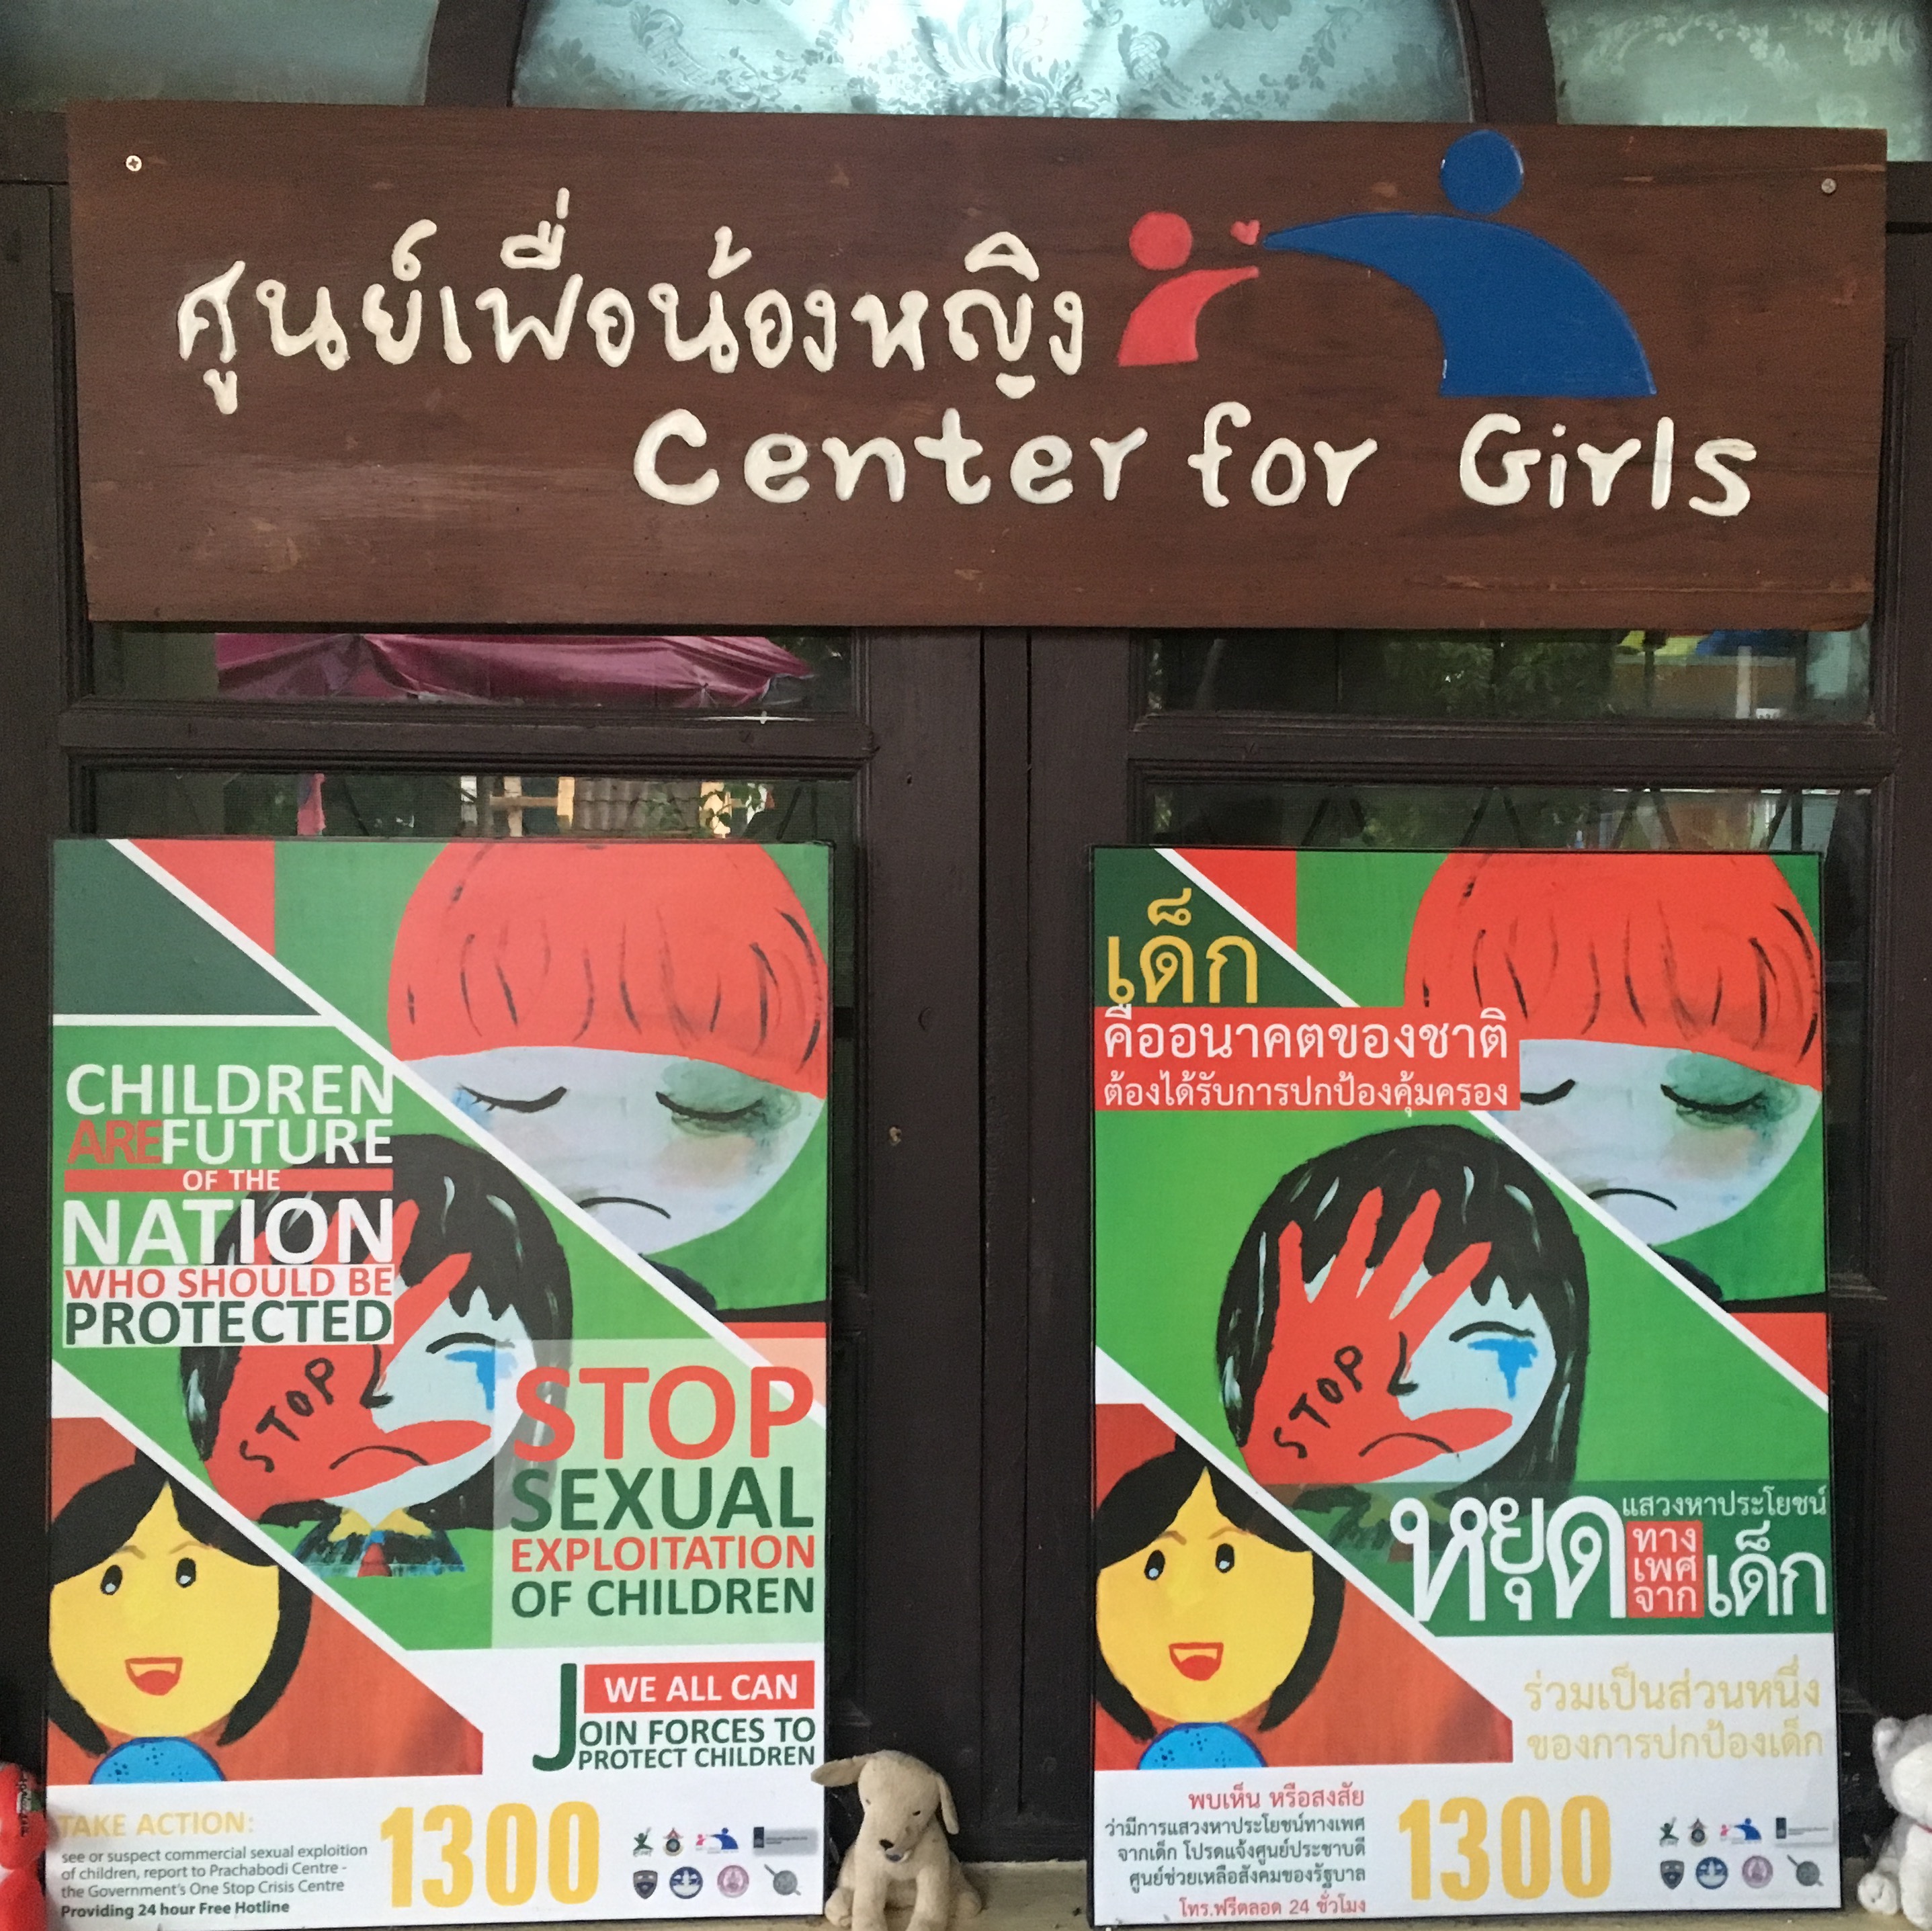 Signage outside Center for Girls in Thailand